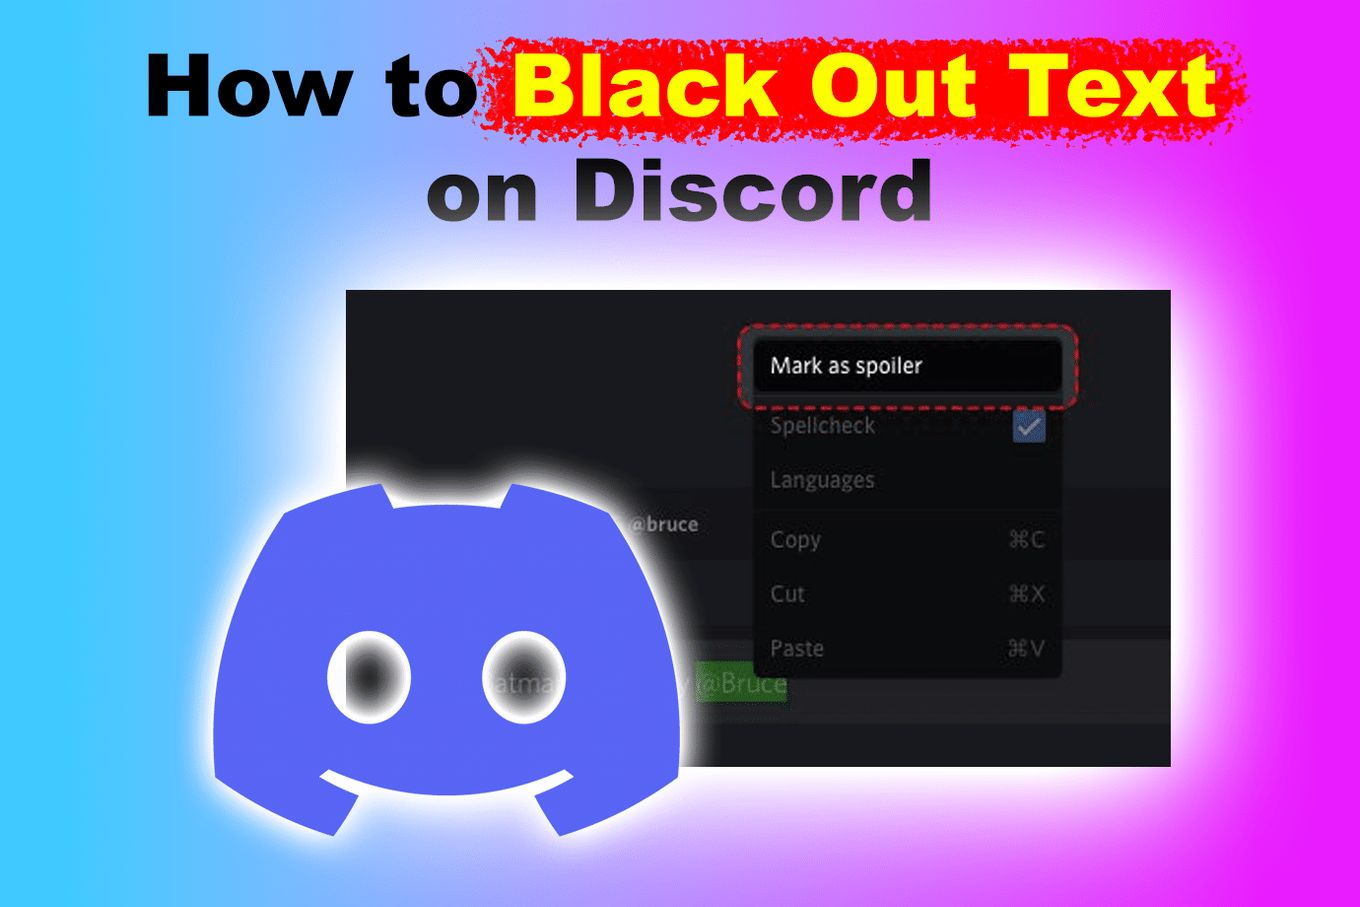 How To Black Out Text on Discord PC